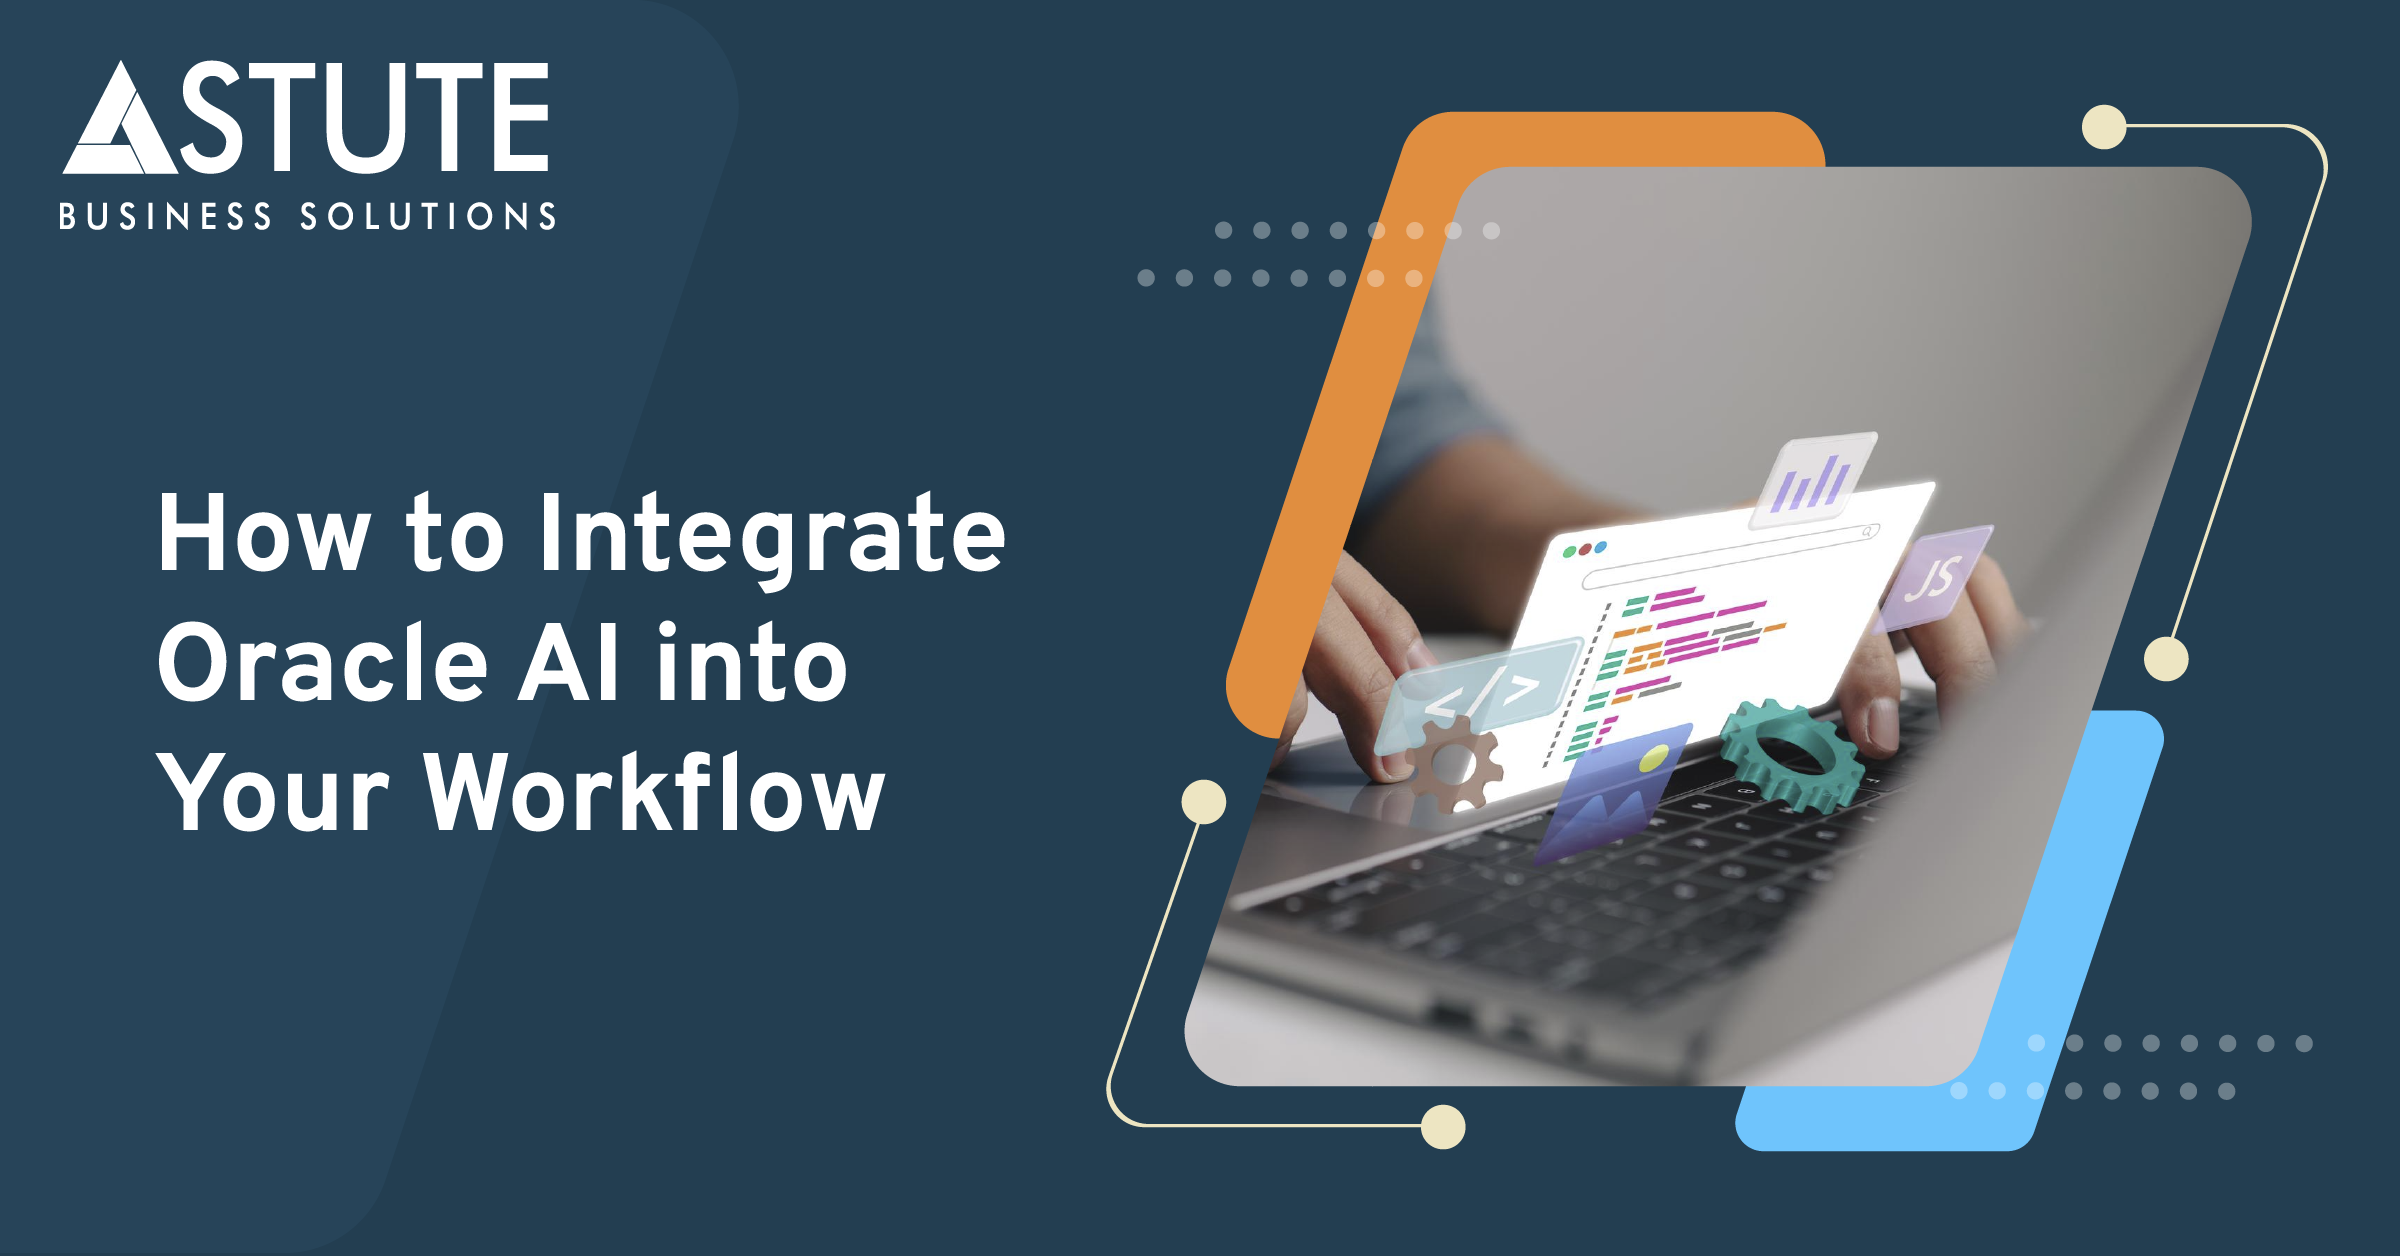 11_How to Integrate Oracle AI into Your Workflow